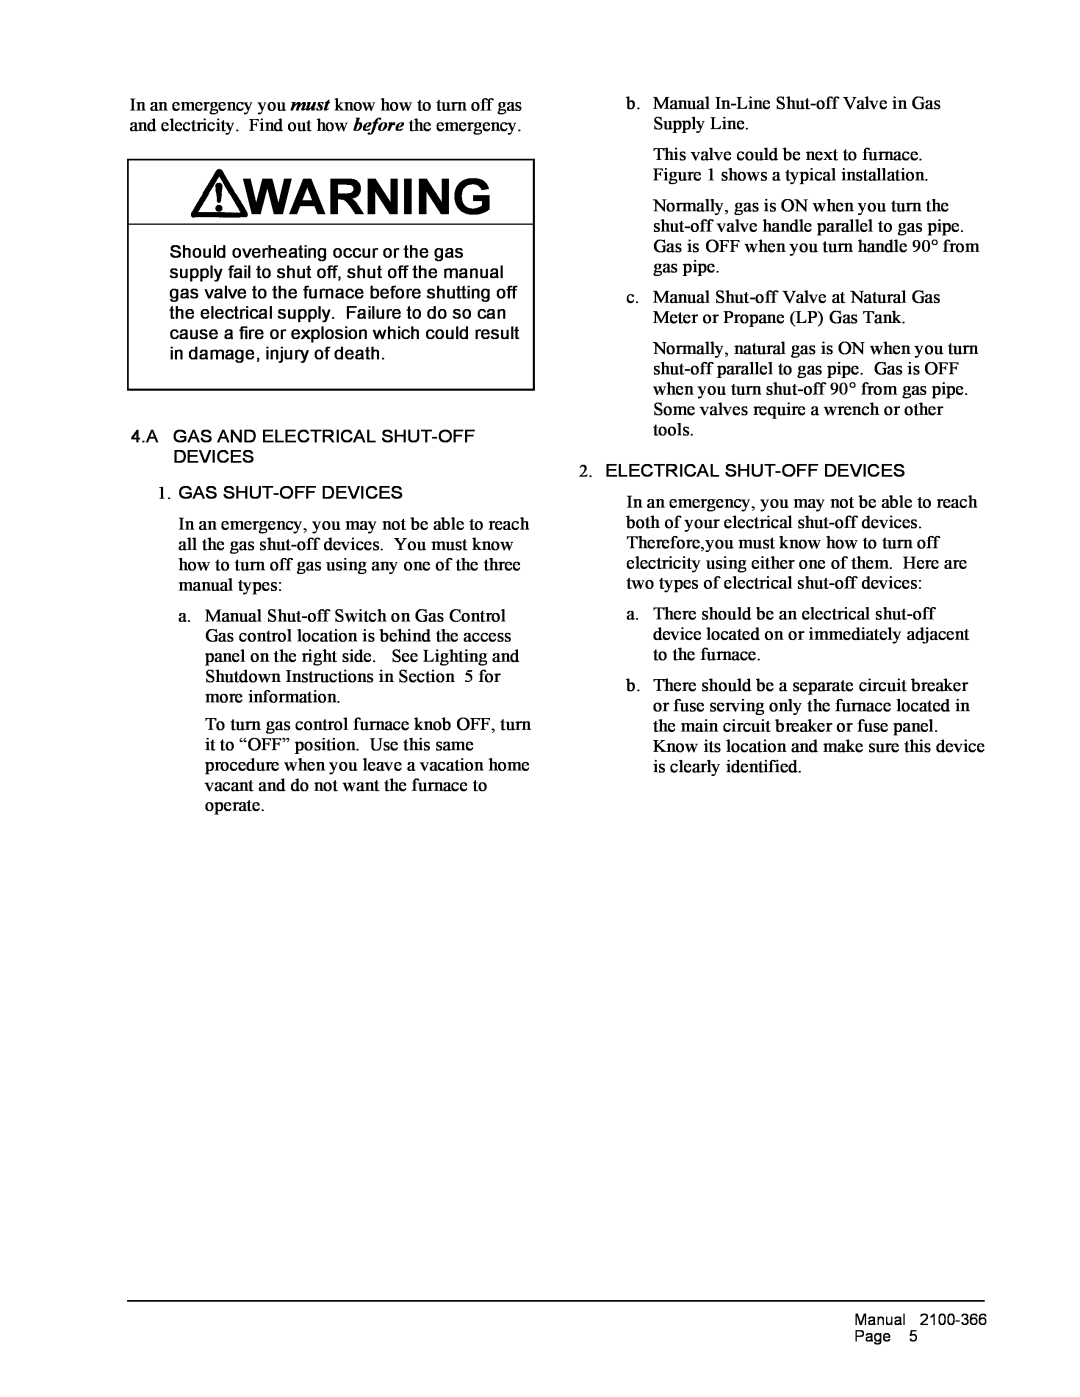 Bard WG-Series installation instructions A Gas And Electrical Shut-Offdevices, Gas Shut-Offdevices 